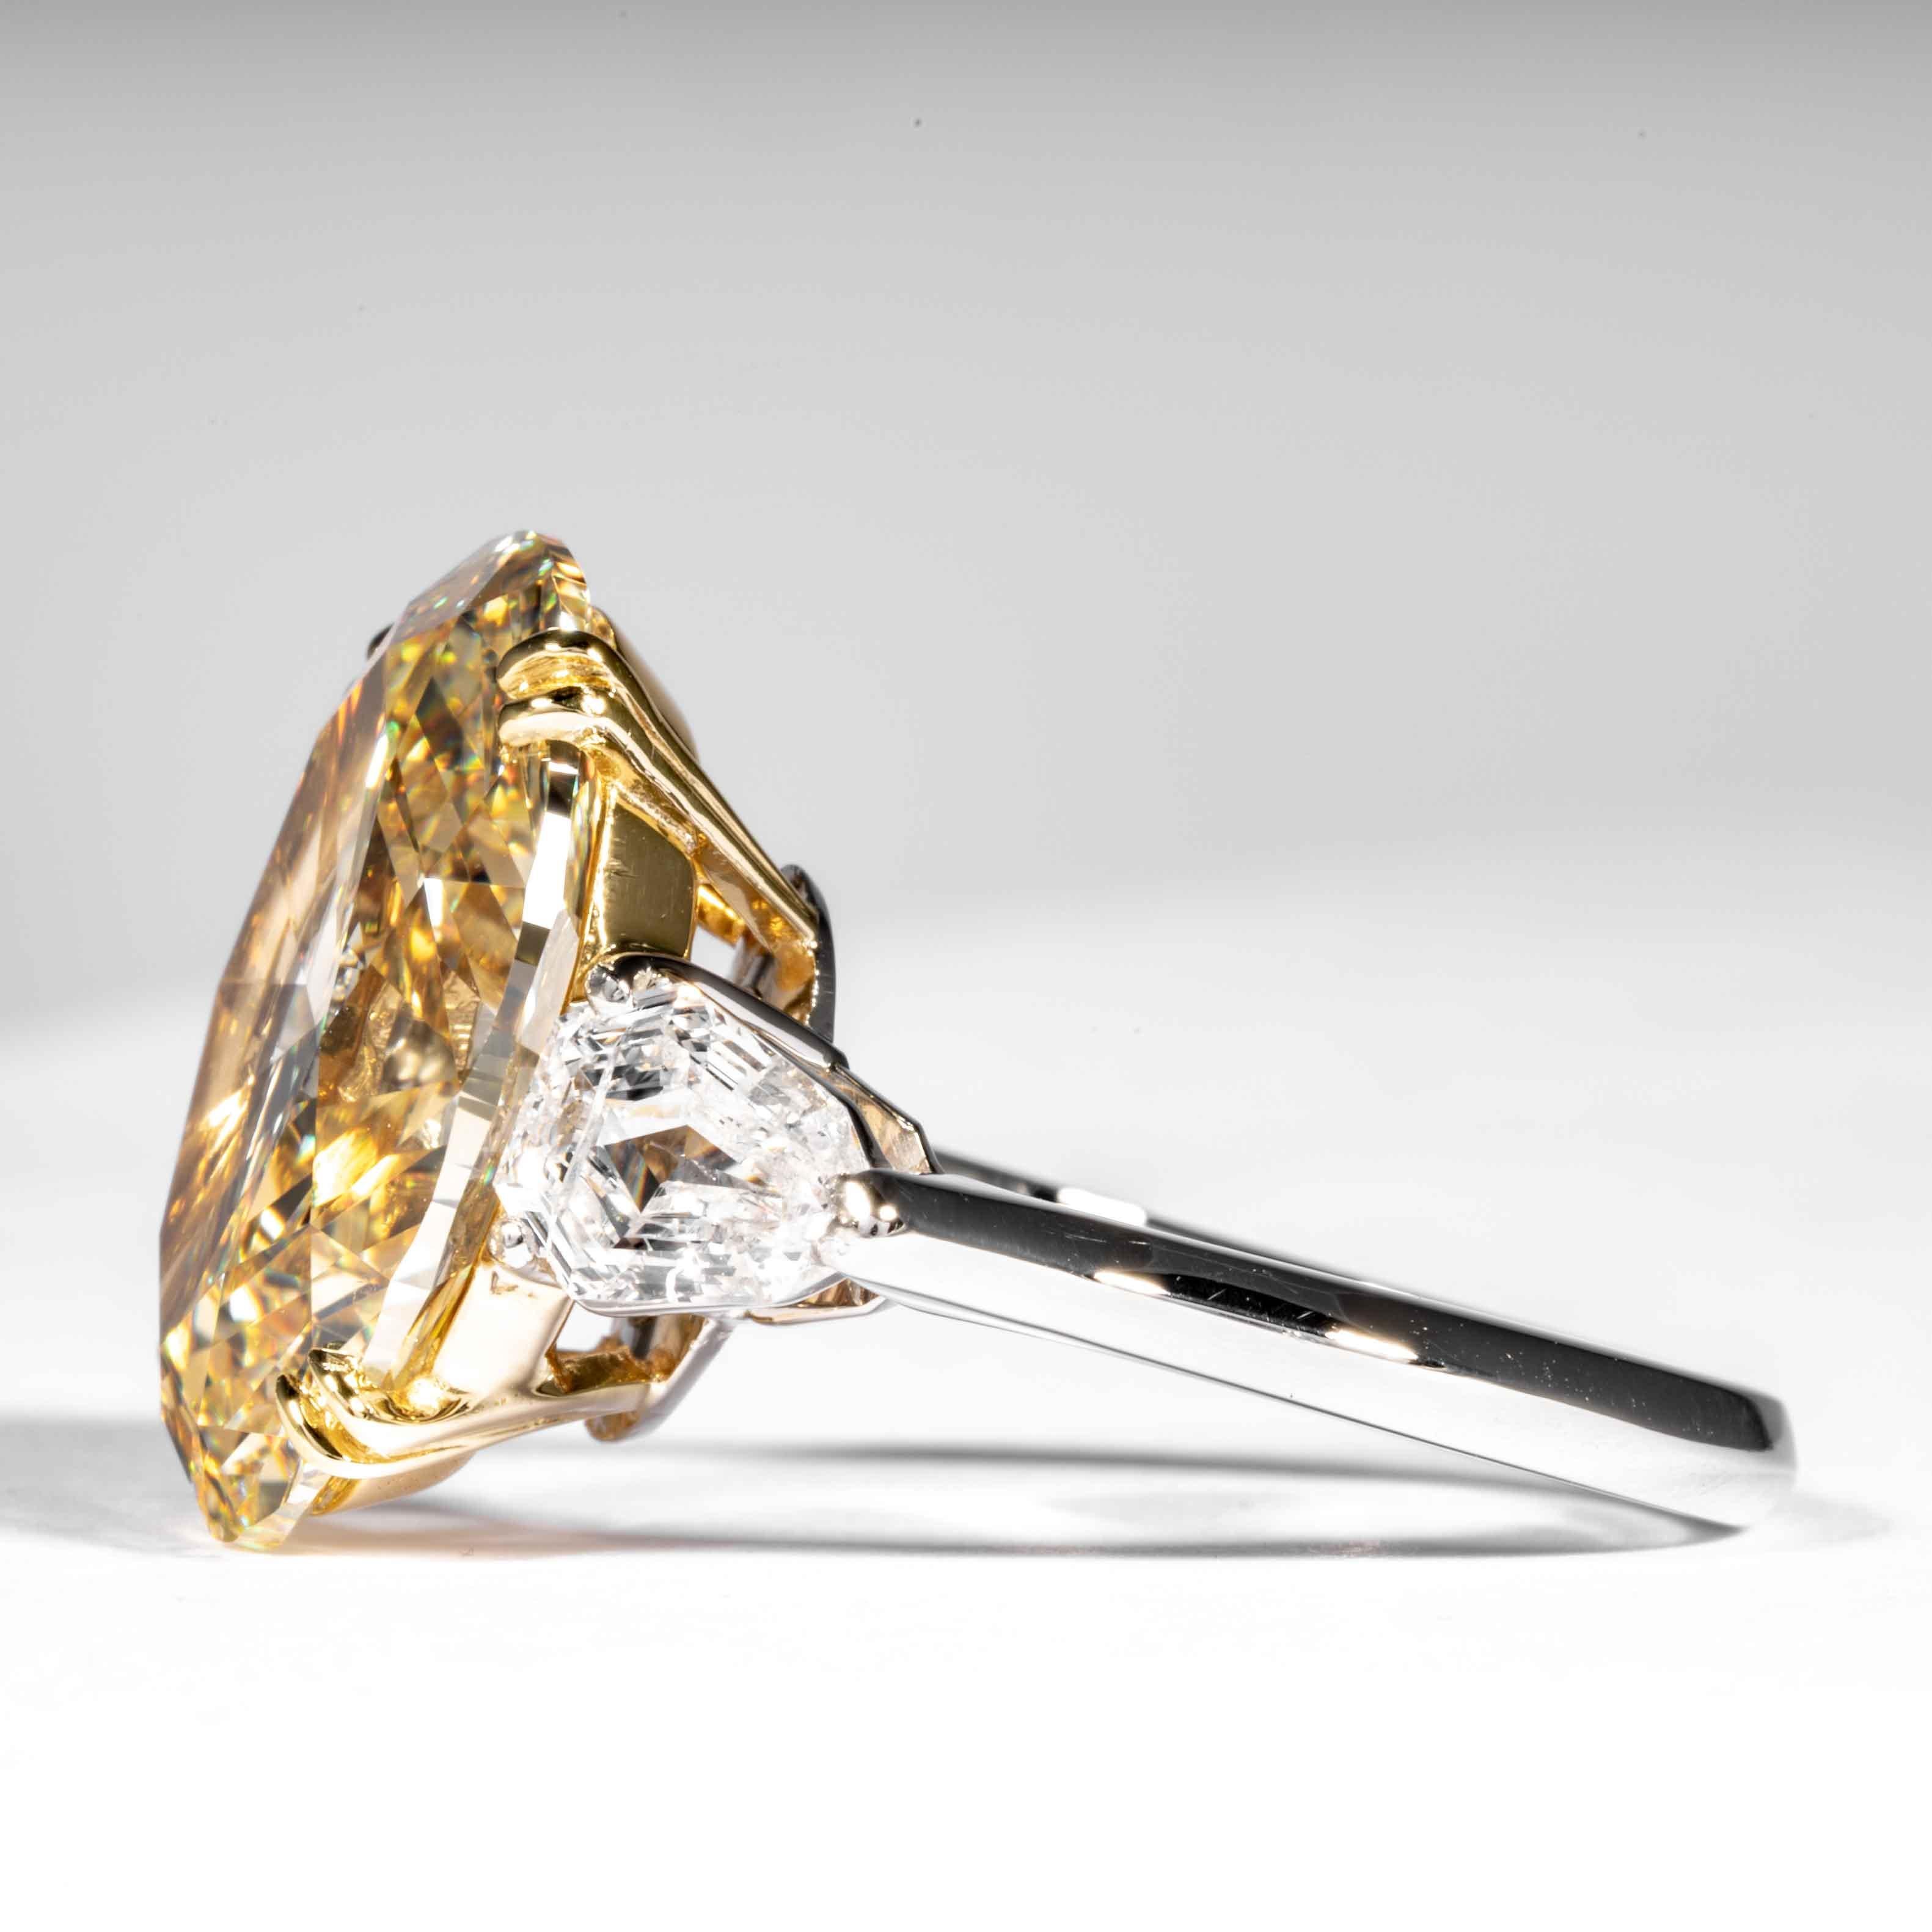 Oval Cut Shreve, Crump & Low GIA Certified 10.09 Carat Fancy Yellow Oval Diamond Ring For Sale